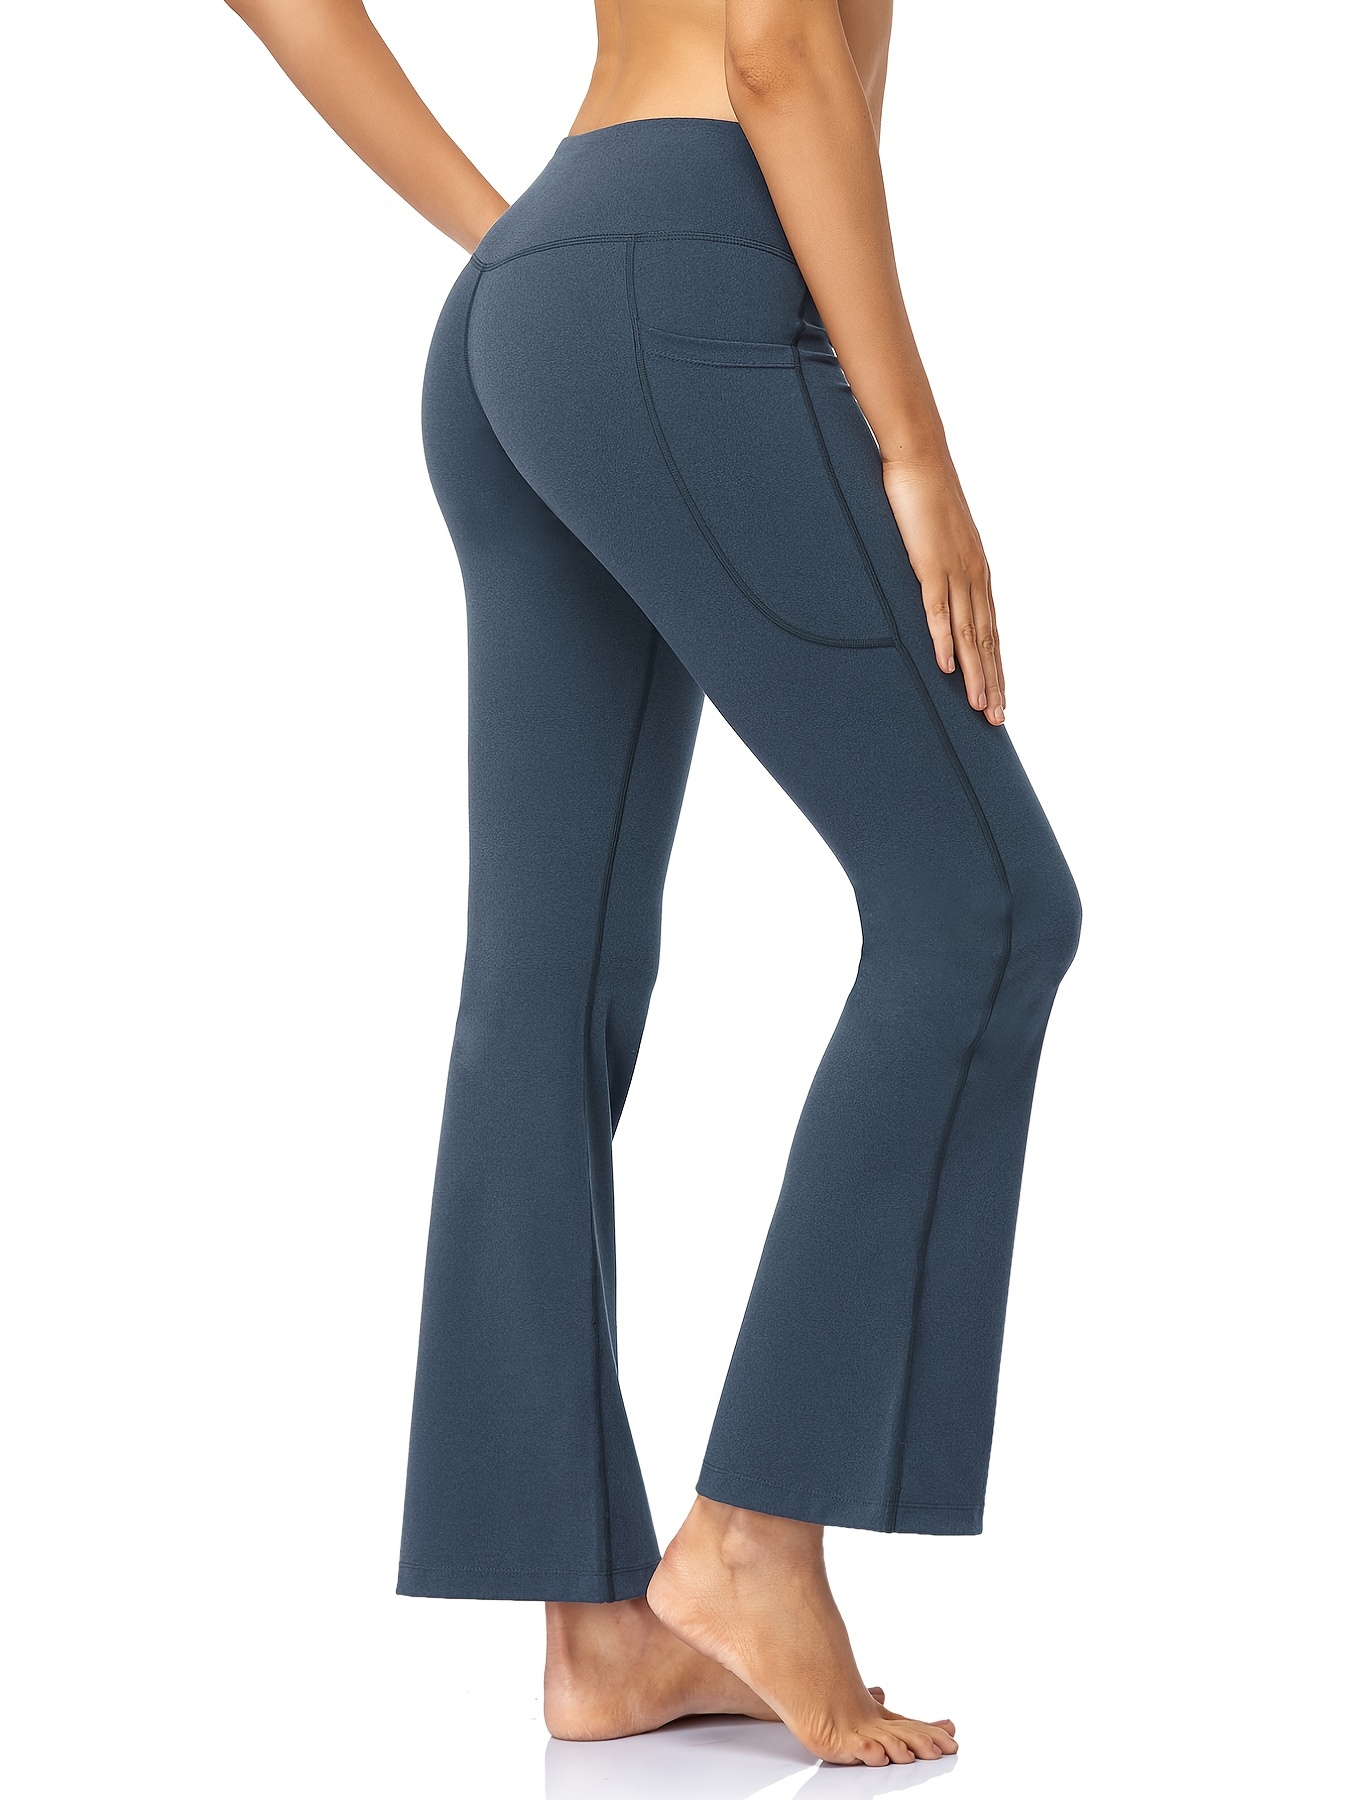 Yogipace,2 Back Pockets, Women's Bootcut Yoga Pants Flare Workout Pants,  27, Navy, Size M : Buy Online at Best Price in KSA - Souq is now  : Fashion